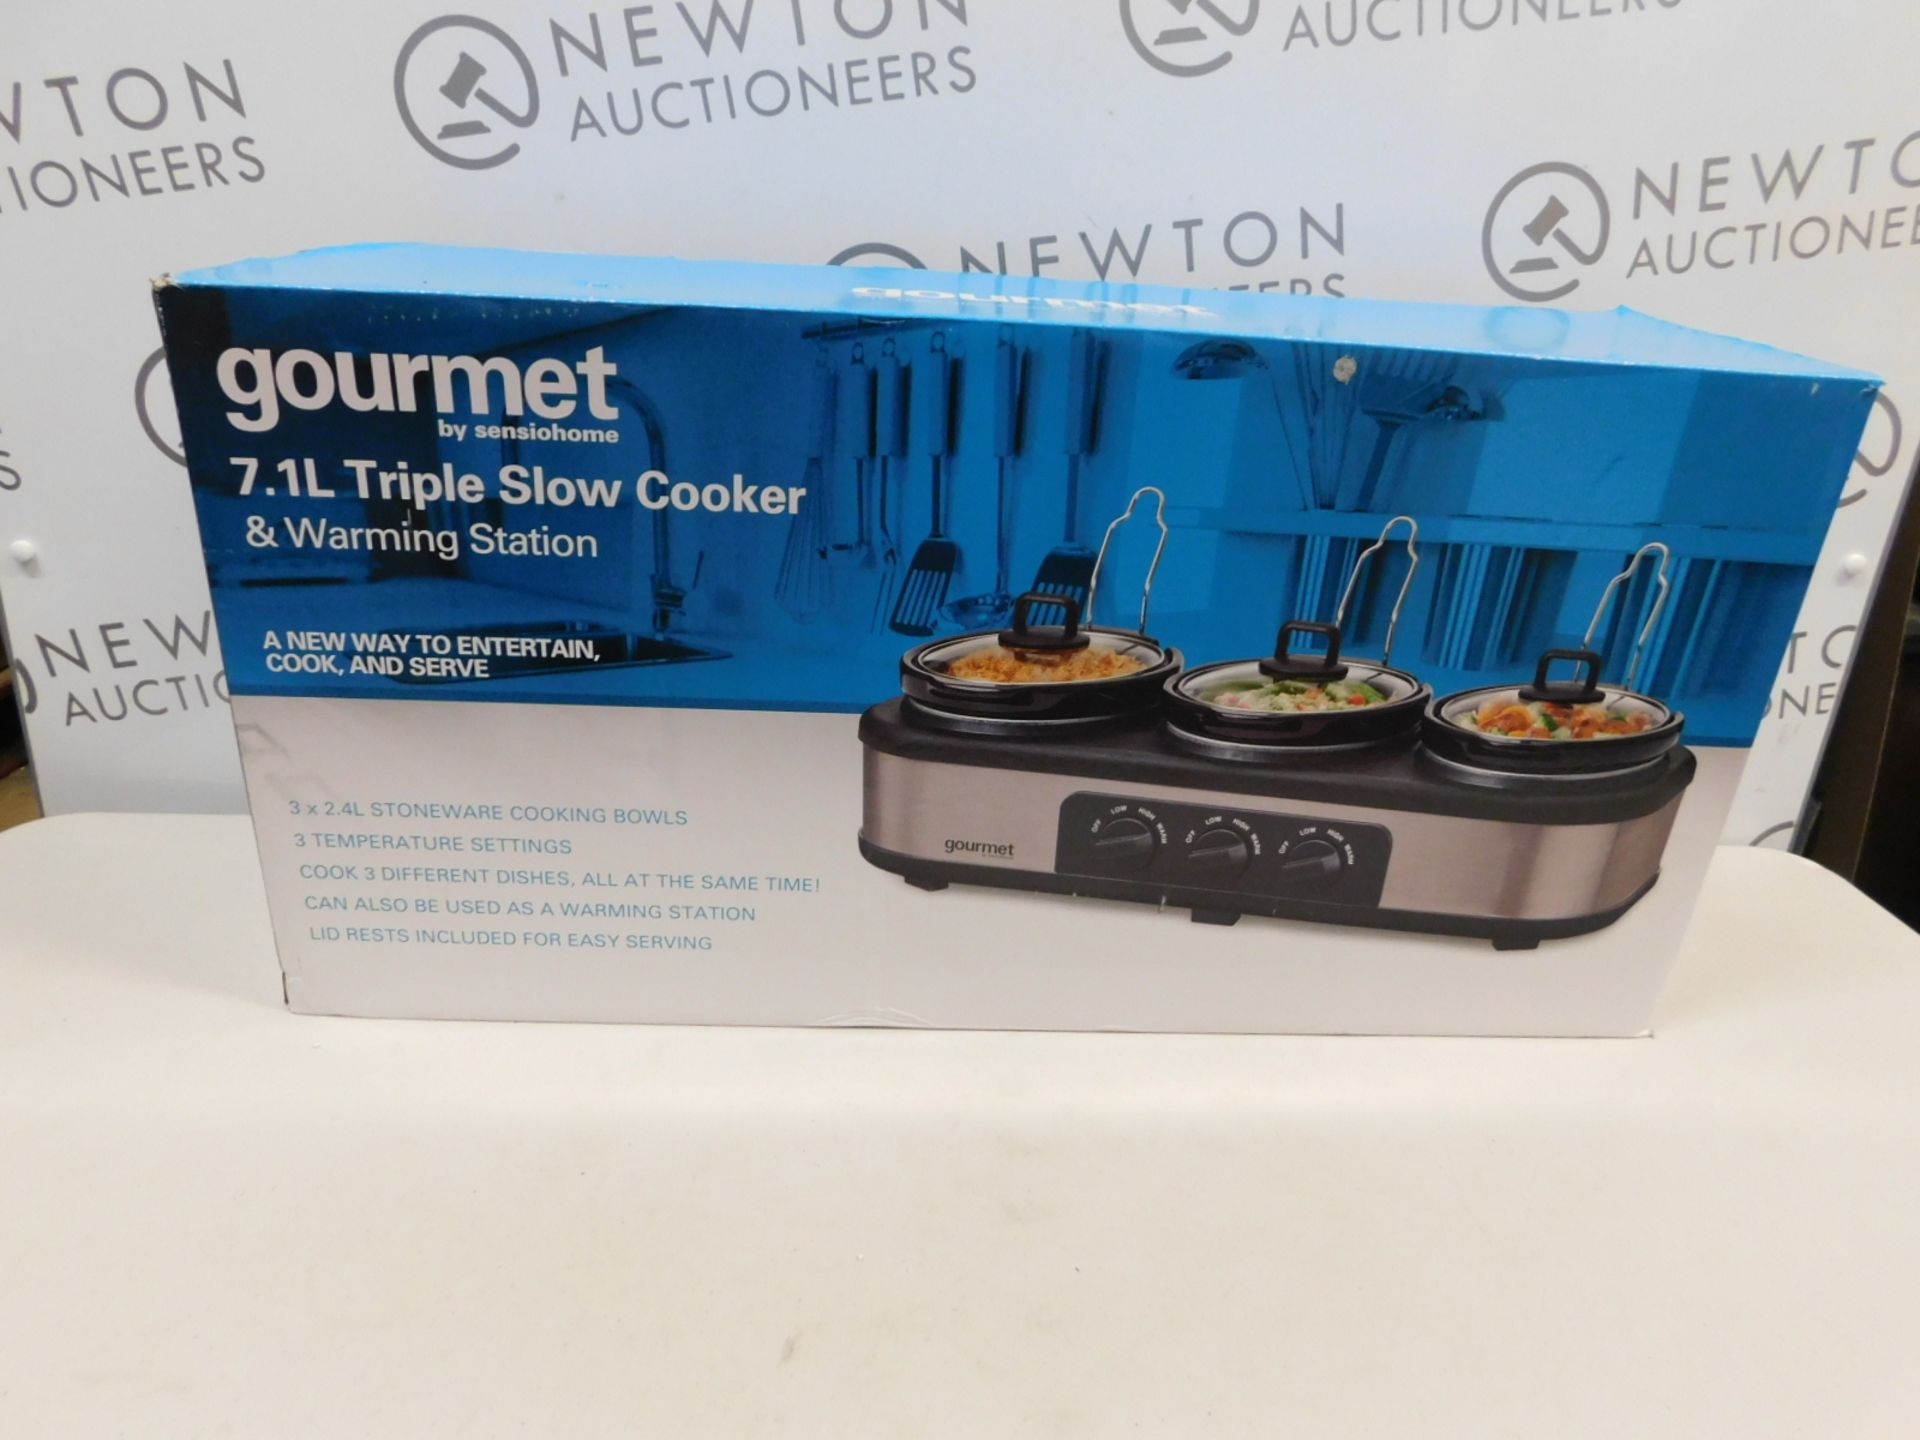 1 BOXED SENSIOHOME GOURMET TRIPLE SLOW COOKER WITH WARMING STATION 7.1L CAPACITY RRP £89.99